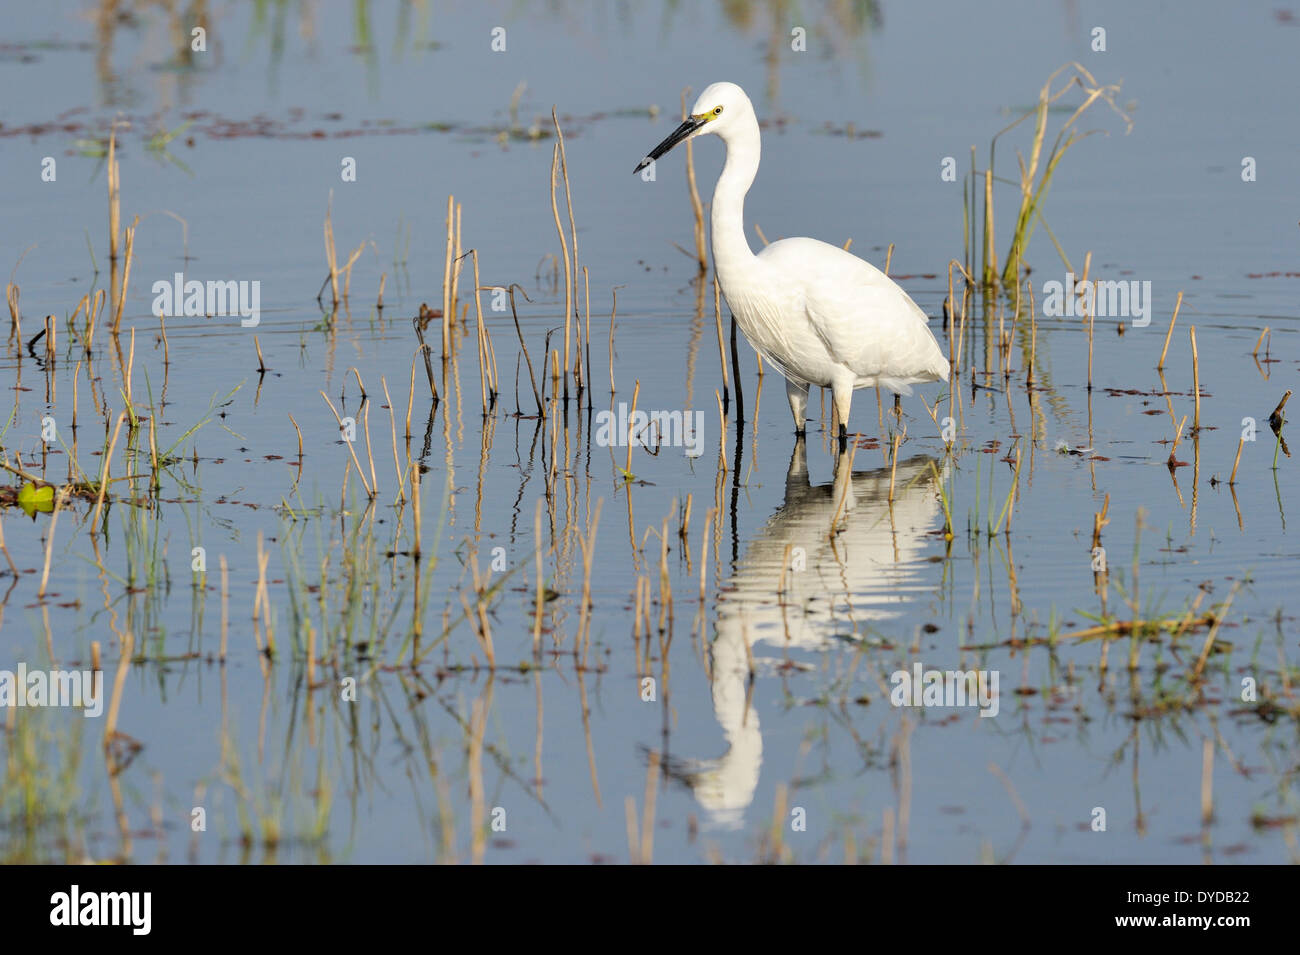 Great egret (Casmerodius albus) foraging in water with reflection. Stock Photo